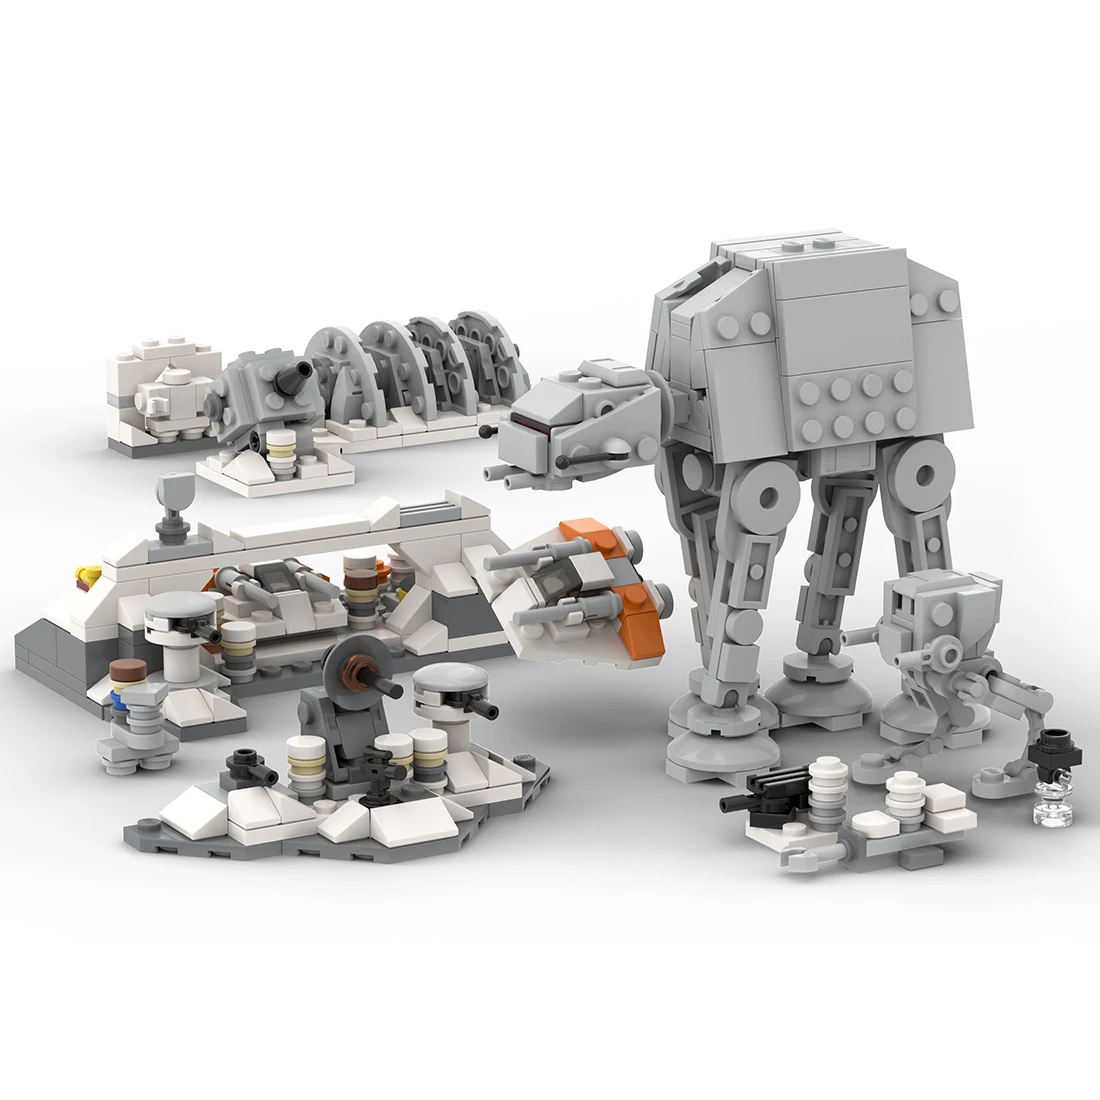 

Authorized MOC-44946 567Pcs Micro Assault on Hoth + AT-AT & AT-ST Spaceship Model Bricks Building Blocks Set (by Ron_mcphatty)